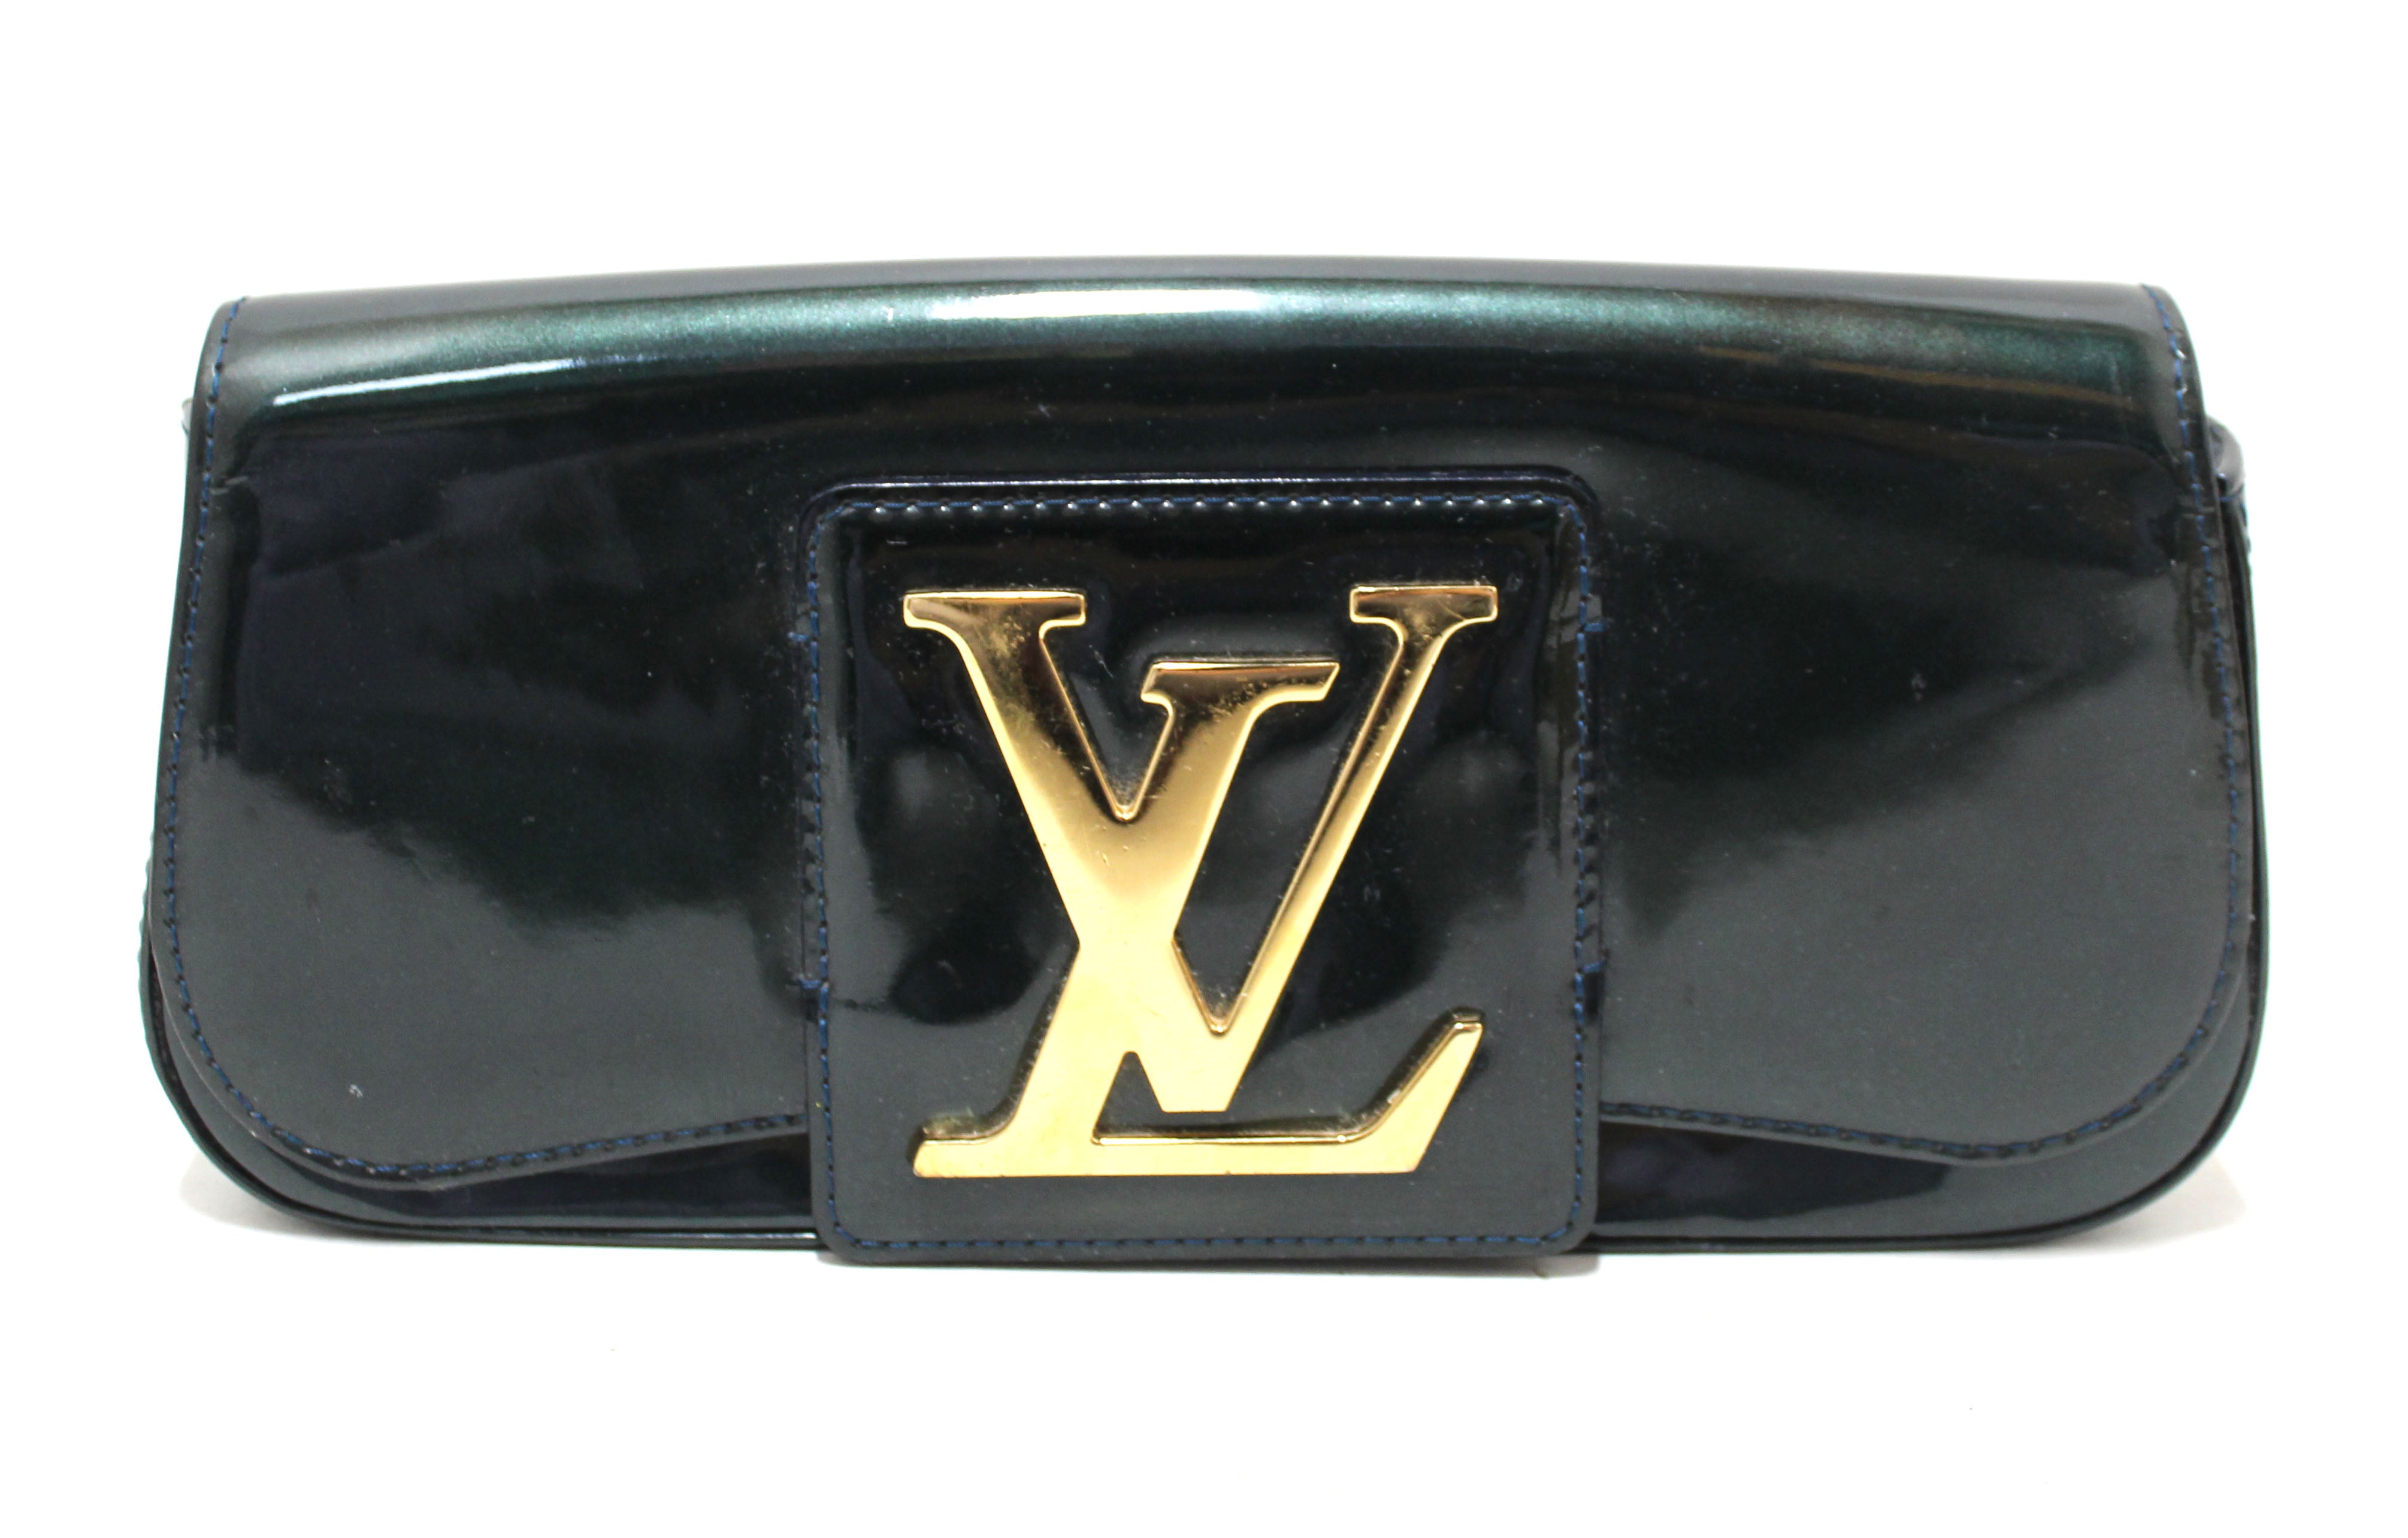 Authentic Louis Vuitton Green Patent Leather Sobe Clutch